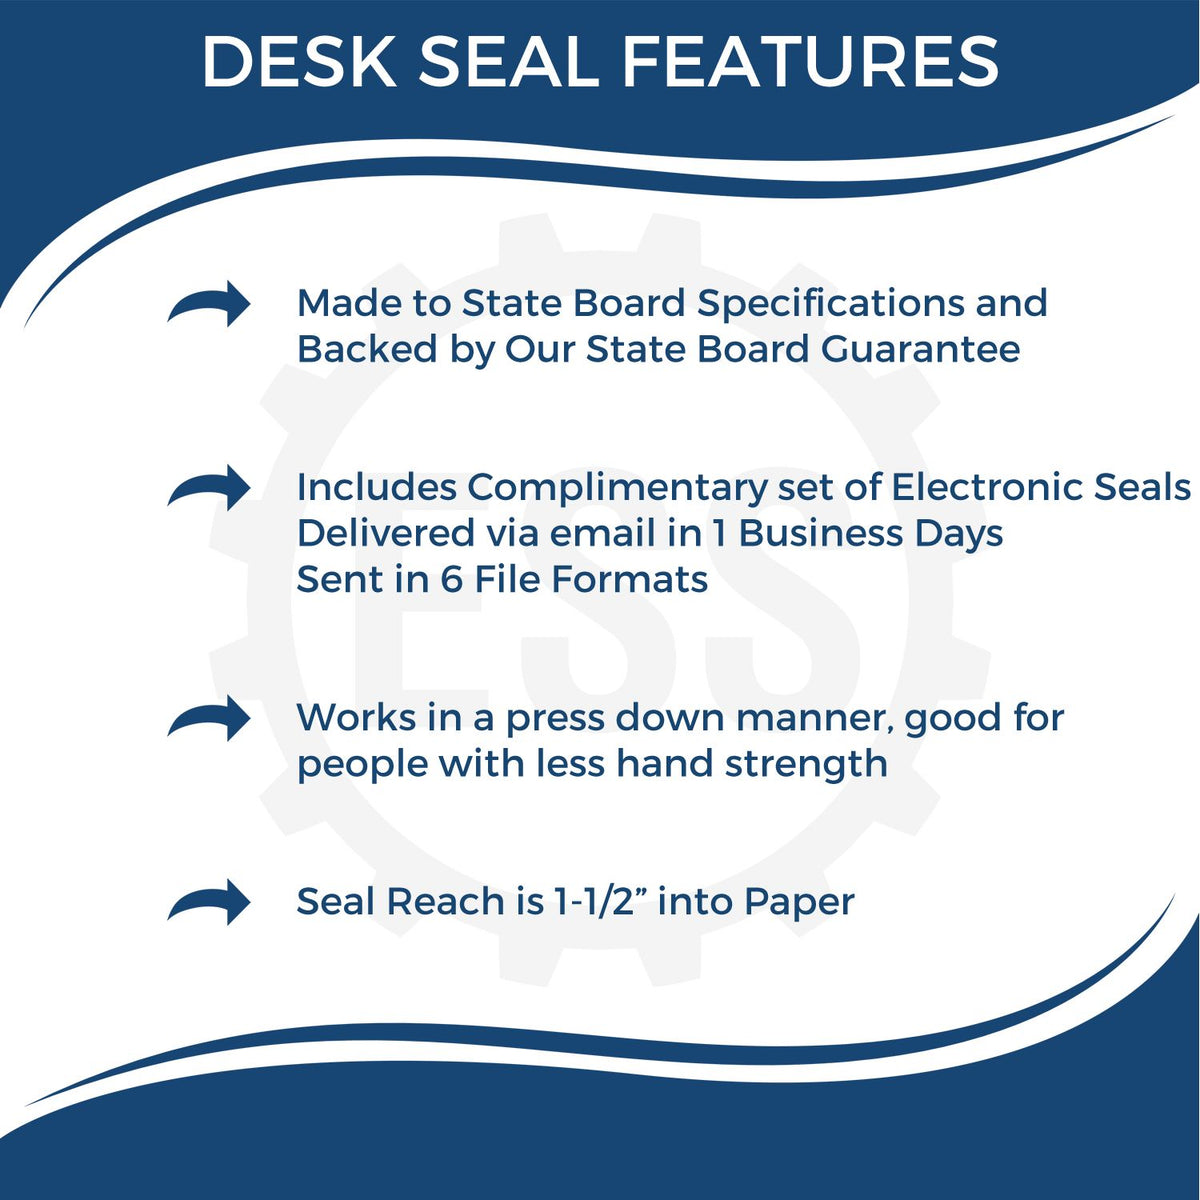 A picture of an infographic highlighting the selling points for the Utah Desk Architect Embossing Seal